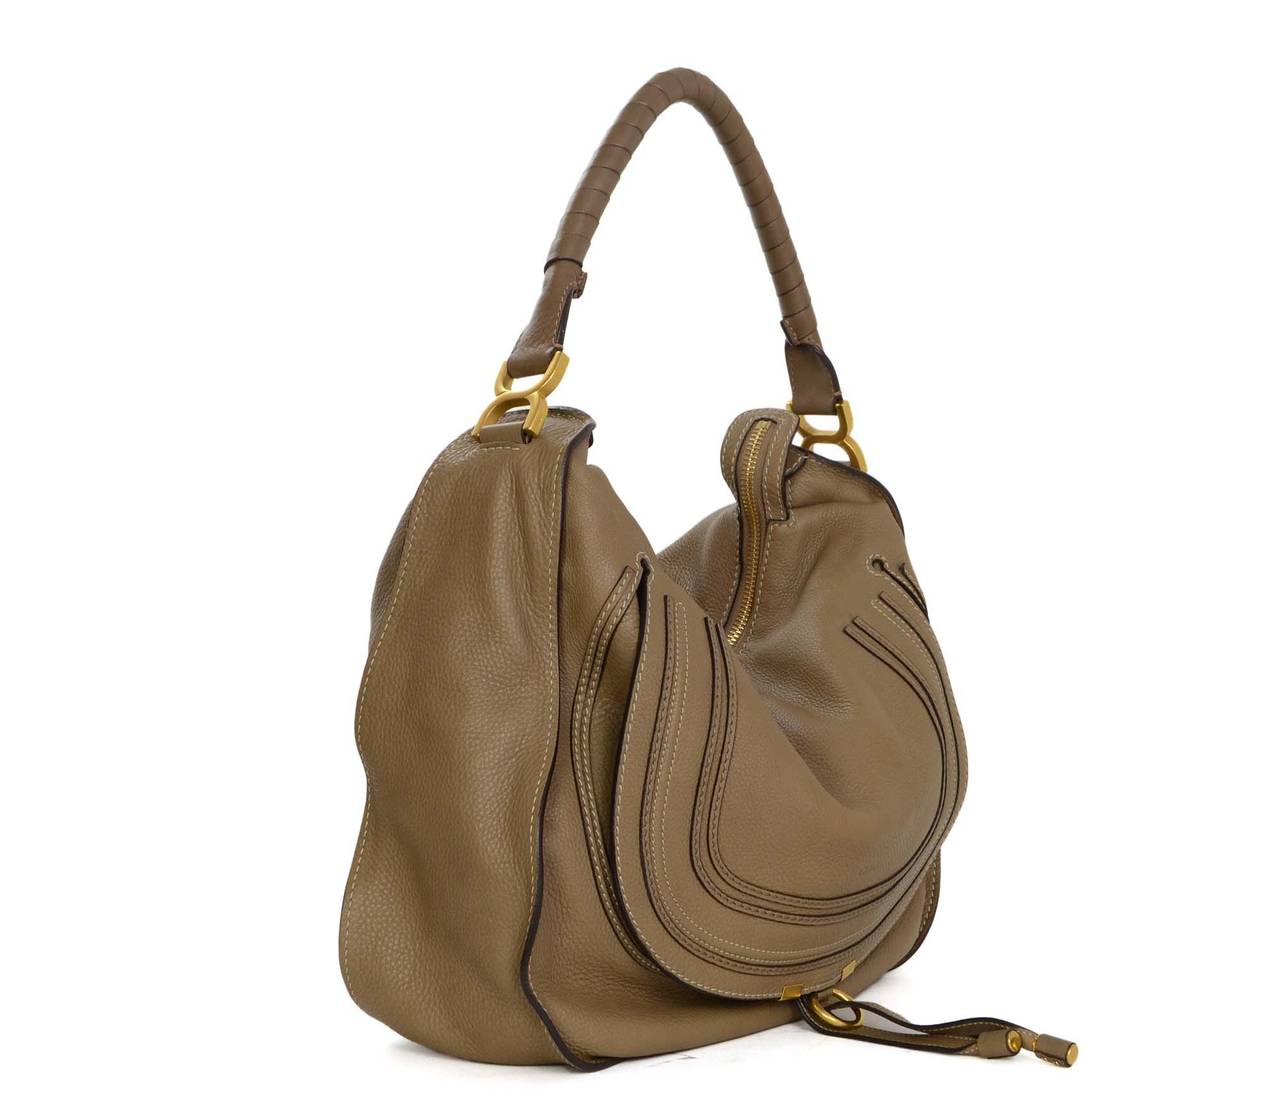 Chloe Taupe Leather Marcie Shoulder Bag 
Made in: Italy
Color: Taupe and goldtone
Hardware: Goldtone
Materials: Leather
Lining: Brown canvas
Closure/opening: Zip across top
Exterior Pockets: Front slit pocket under flap top
Interior Pockets: